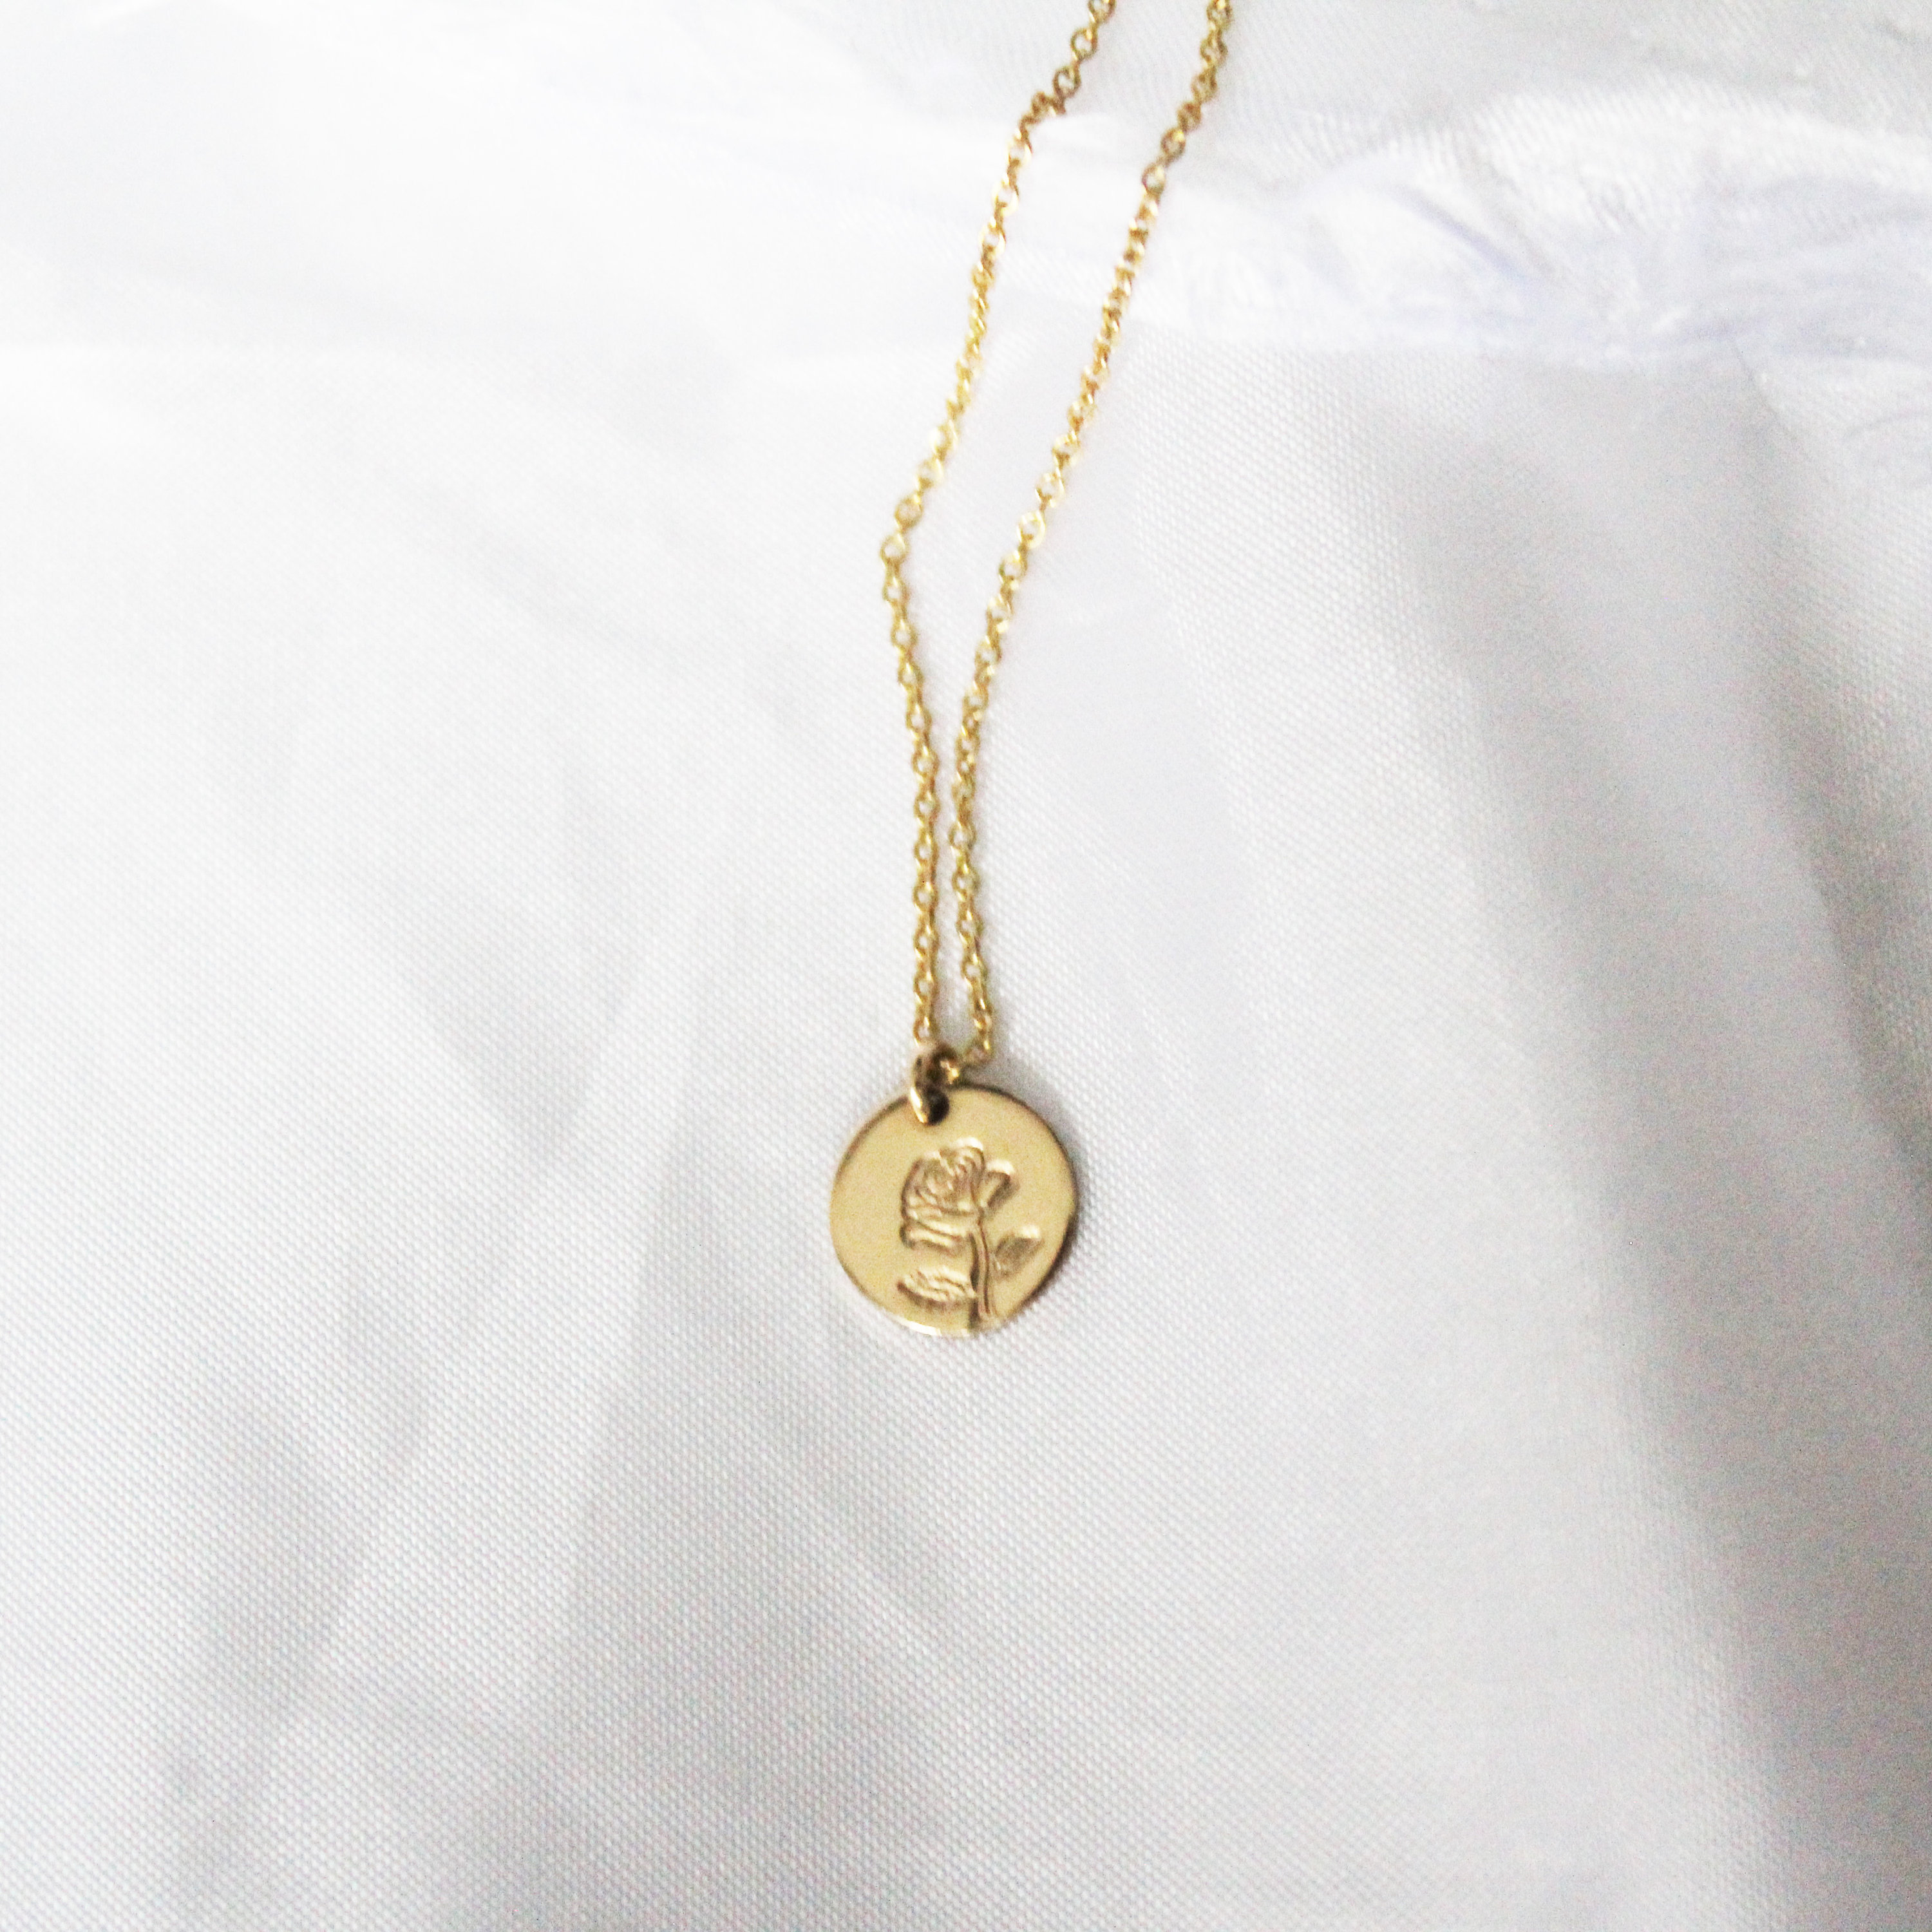 Small Gold Coin Necklace, Dainty Gold Disc Pendant Necklace, Minimalist Layering  Necklaces for Women Great for Everyday 